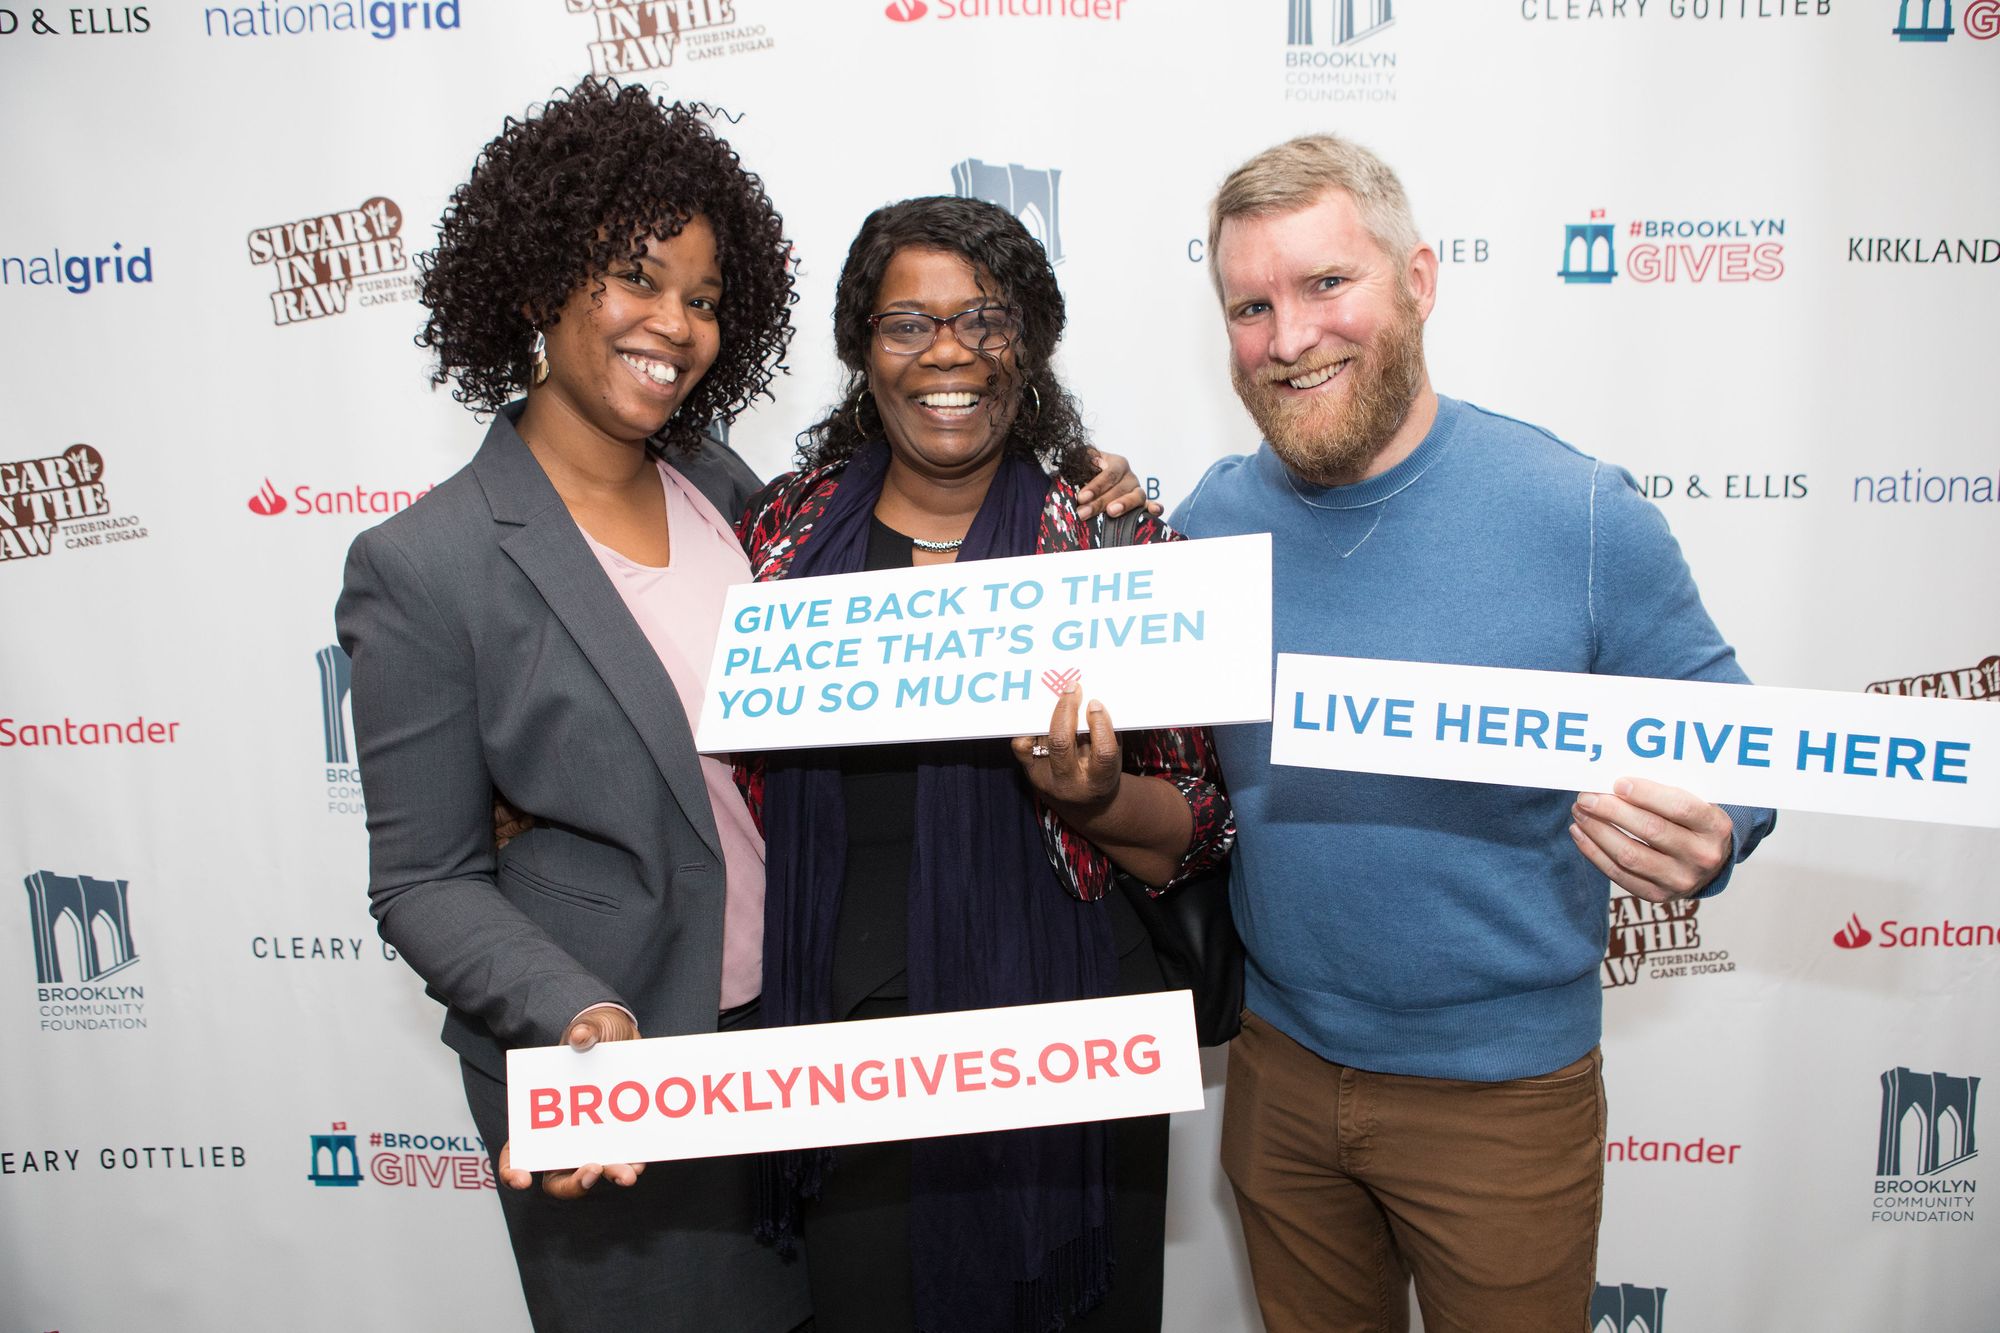 Spread Love the Brooklyn Way: Give Where You Live!